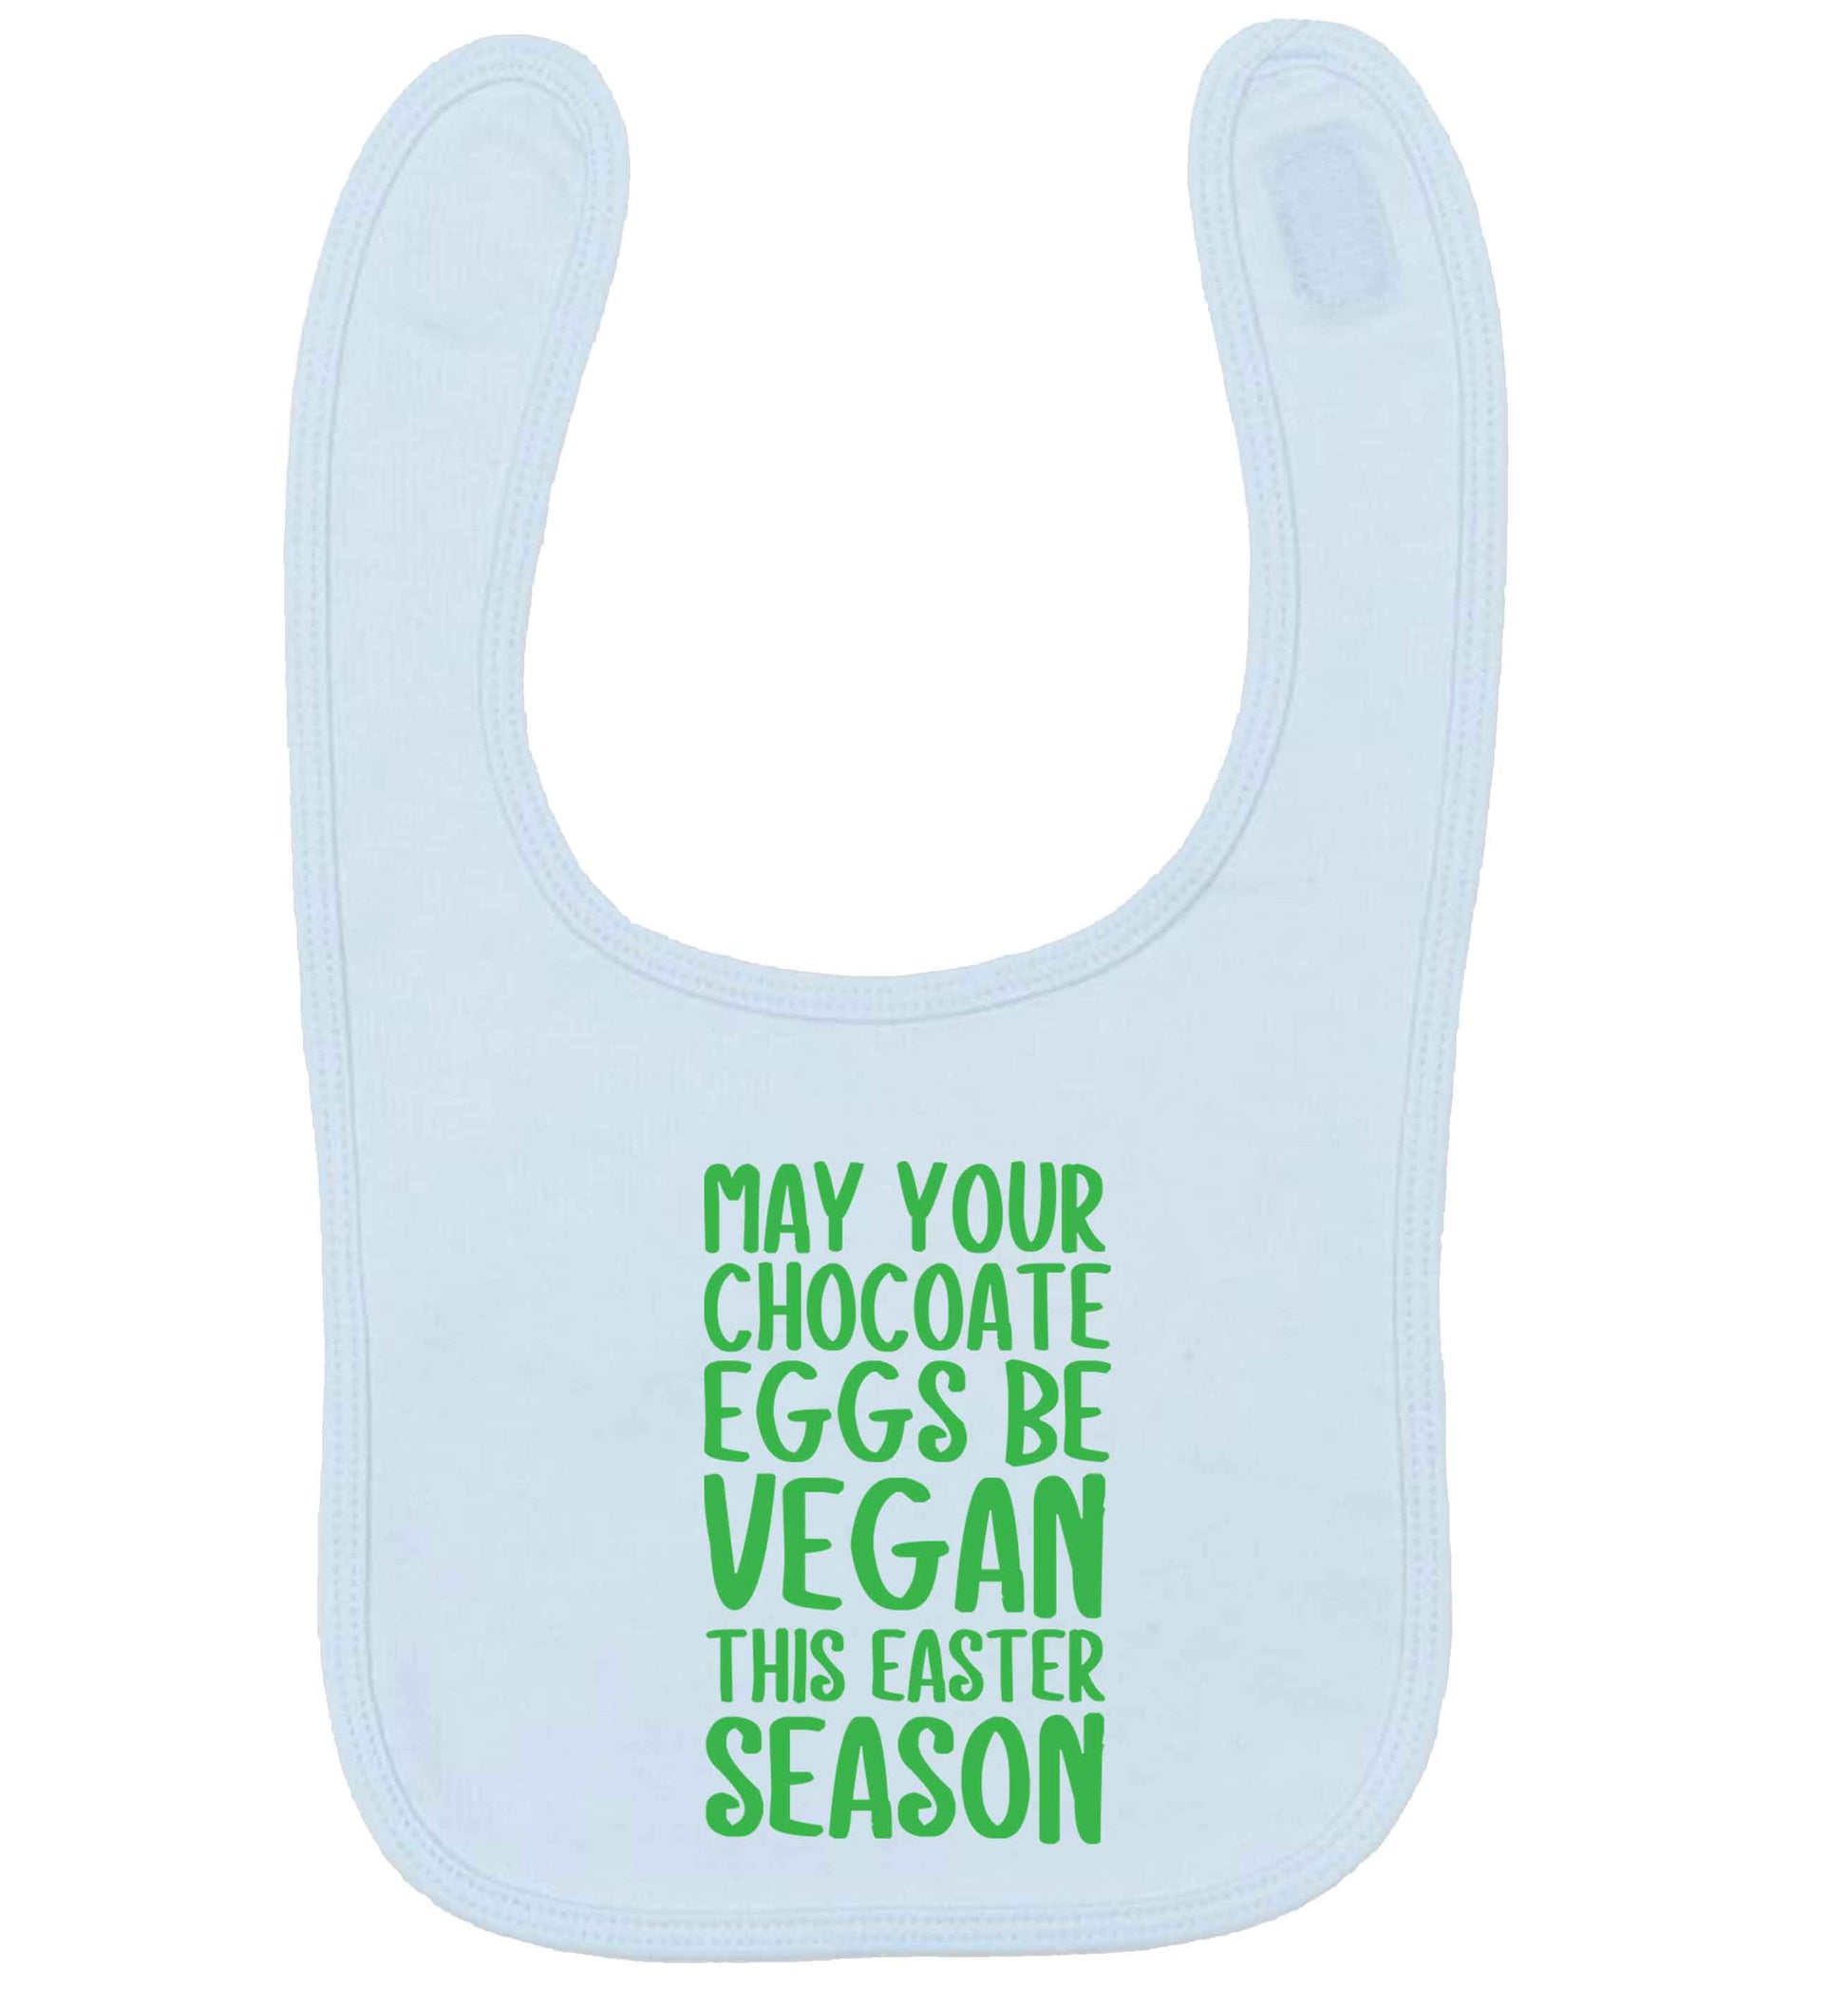 Easter bunny approved! Vegans will love this easter themed pale blue baby bib